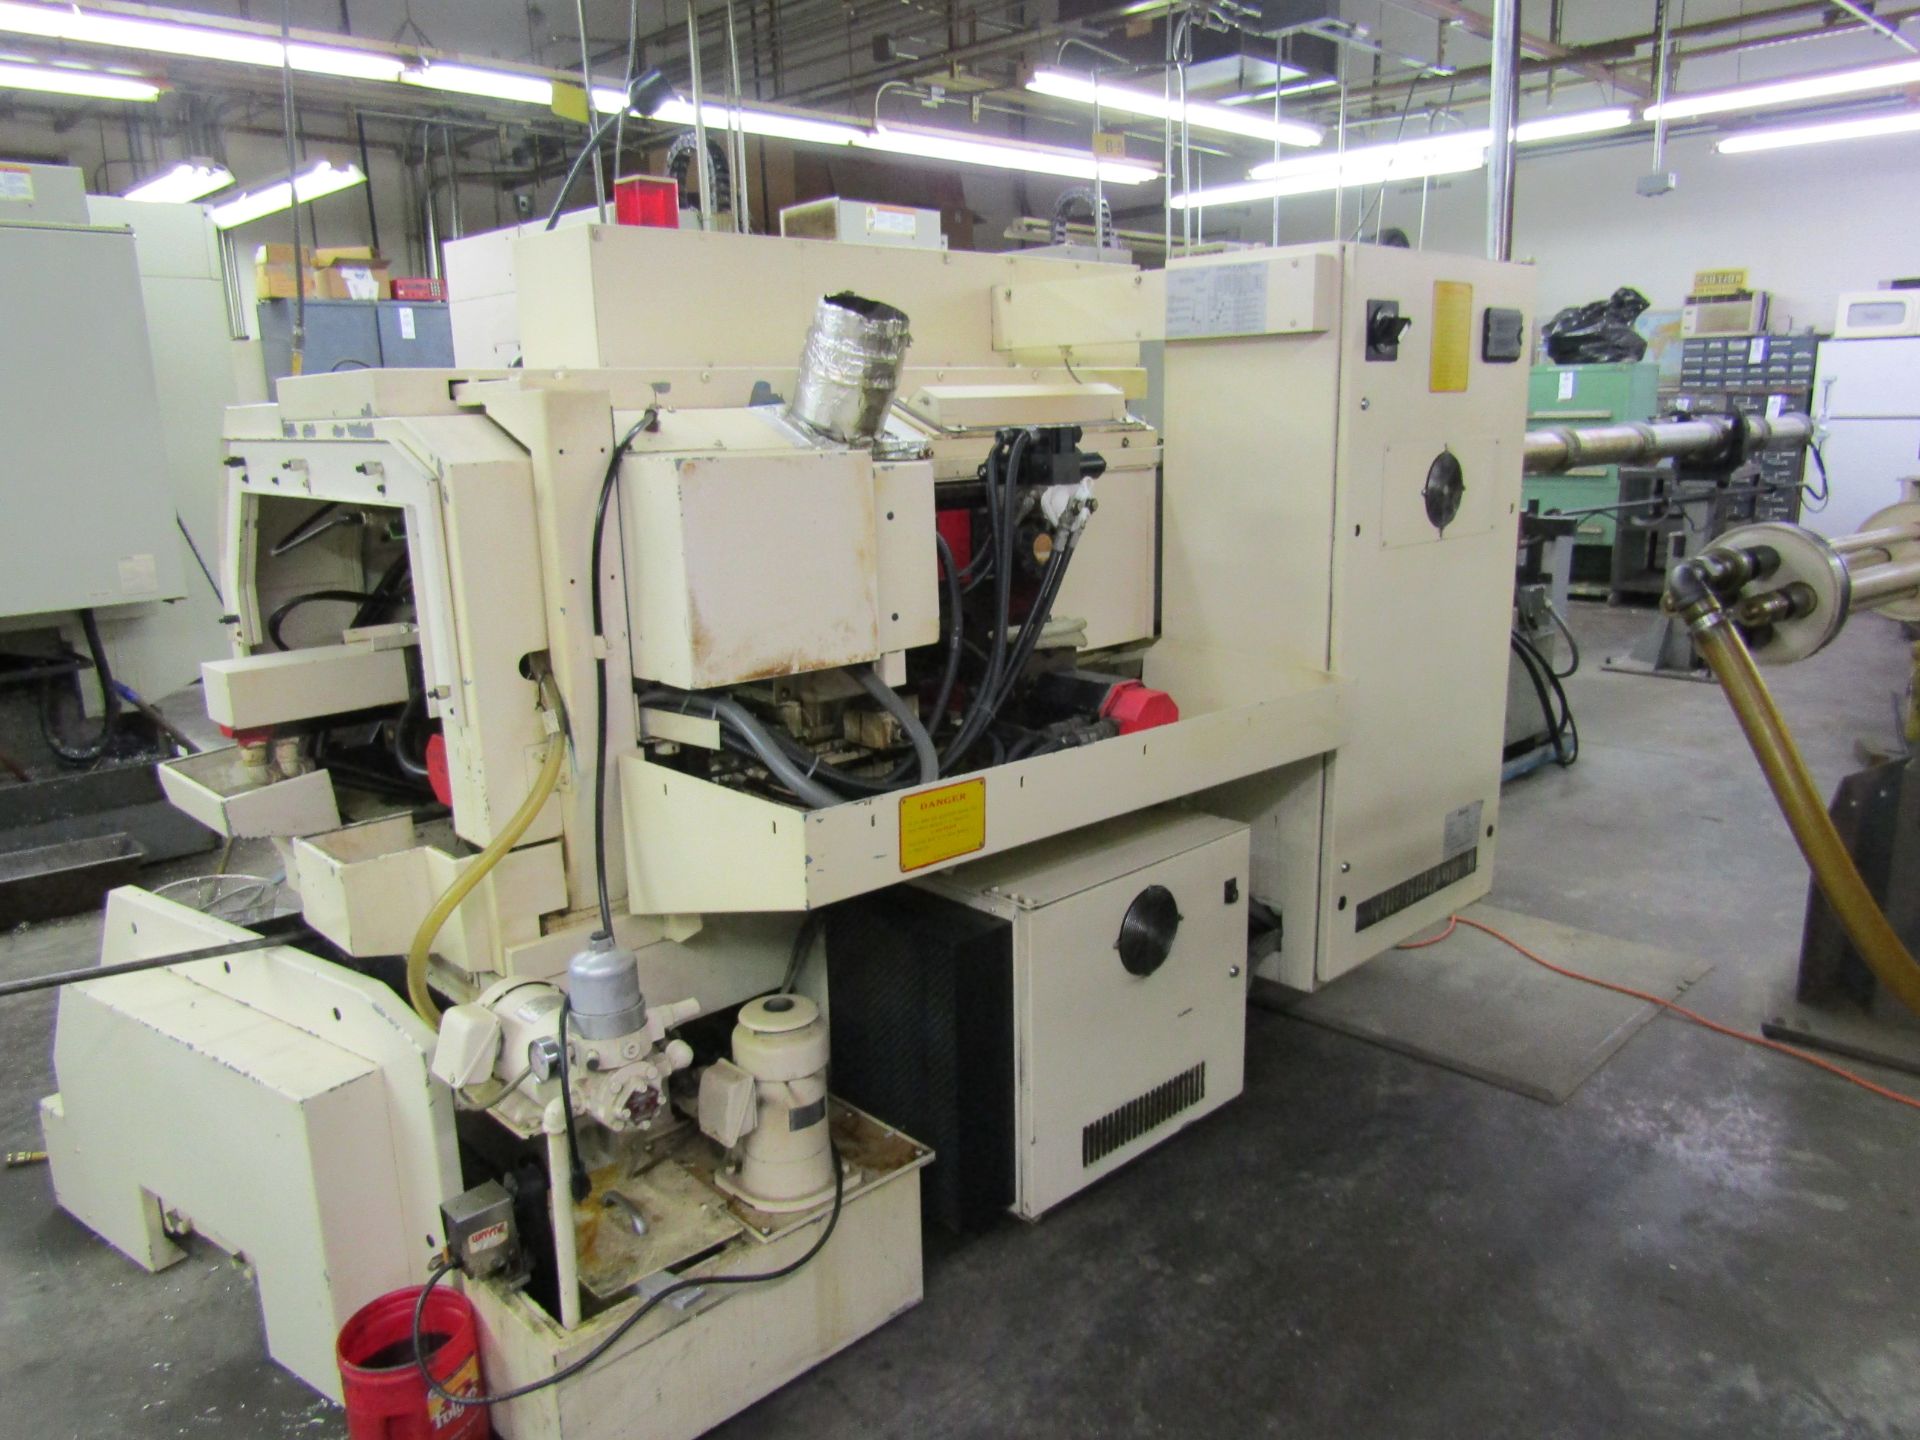 MIYANO BNC-34S CNC TURNING CENTER, SUB SPINDLE 4" CHUCK, 10 TOOL ATC, WITH TOOLING, FANUC SERIES - Image 3 of 9